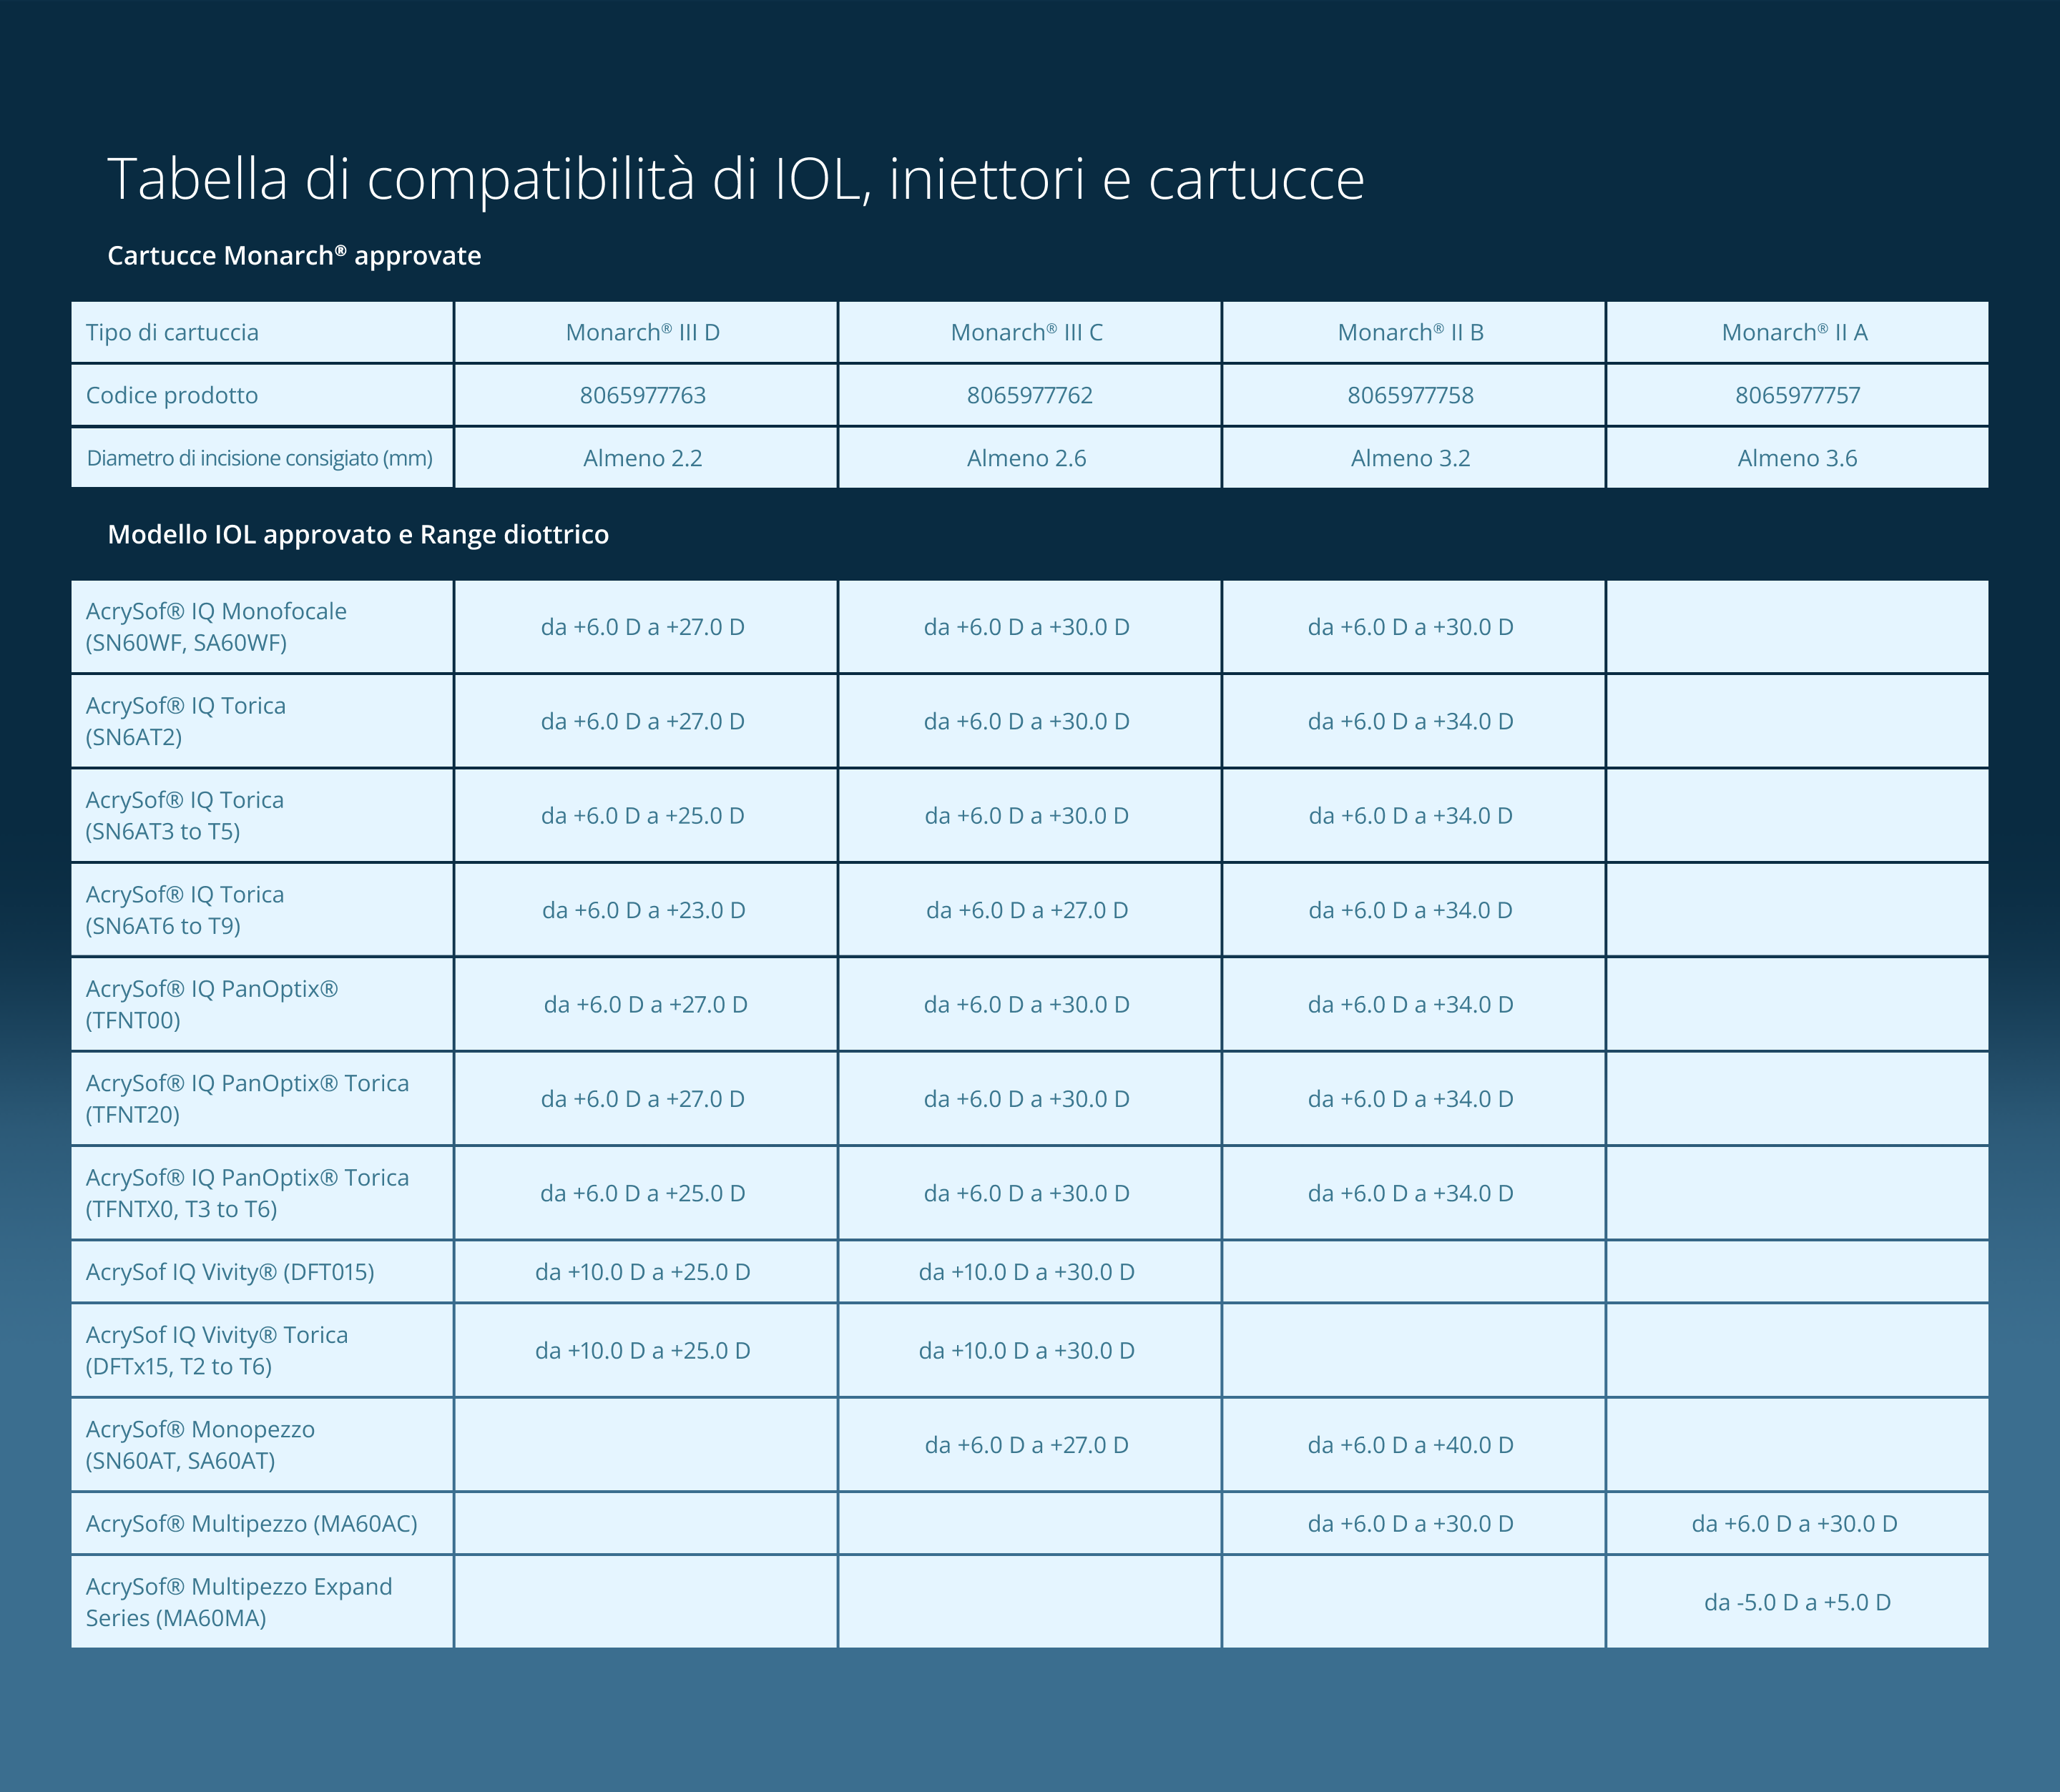 Compatibility chart of IOLs, injectors and cartridges